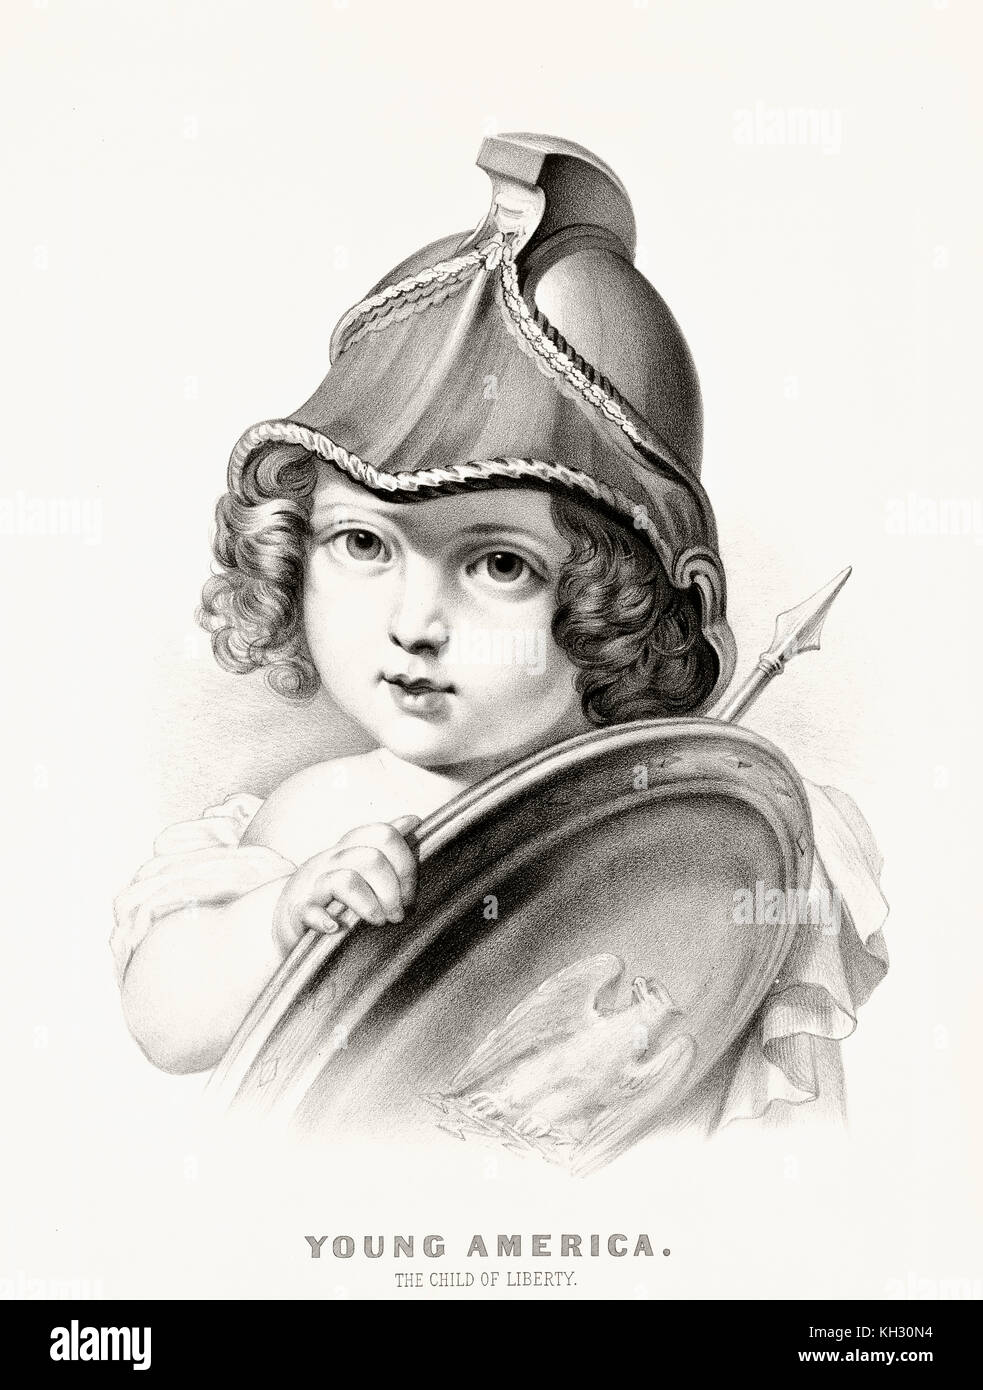 Old illustration depicting the personification of Young America: the Child of Liberty. By Currier & Ives, publ. in New York, 1872 Stock Photo